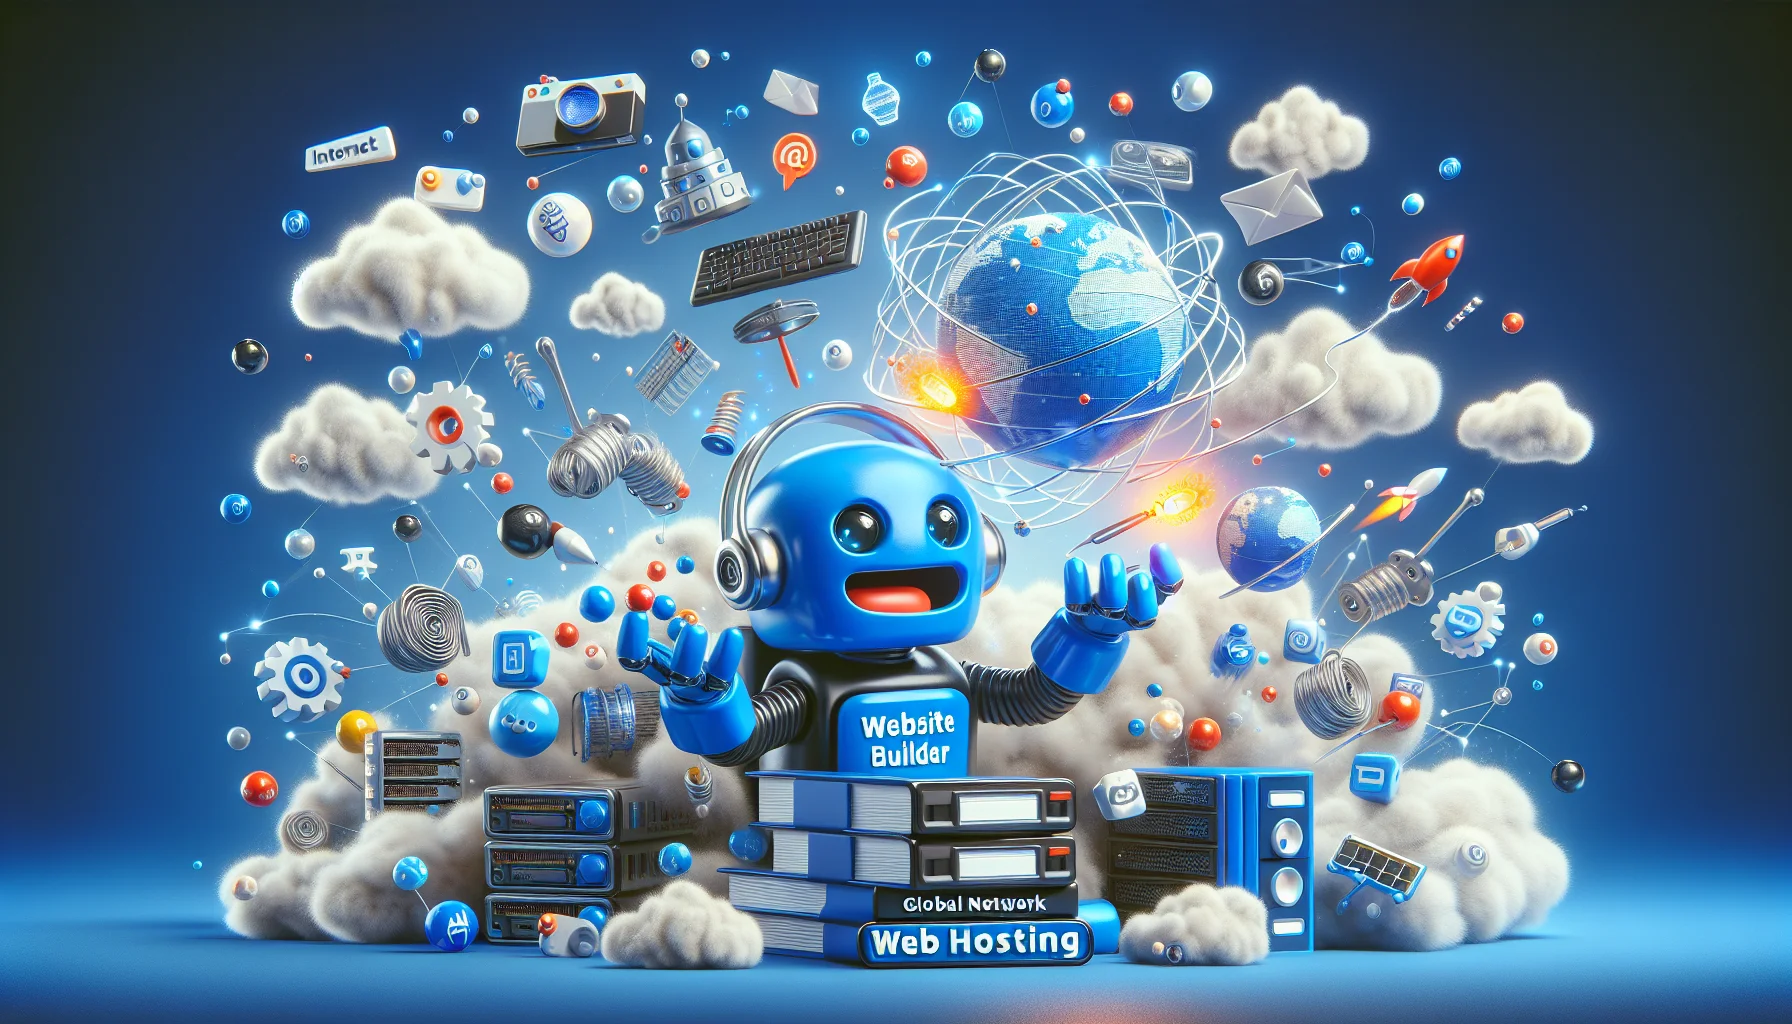 Create a humorous and realistic image that showcases a fictional blue-themed website builder in an interesting scenario enticing web hosting. The builder, characterized by a friendly and playful blue cartoon robot, is using his digital tools to juggle various internet icons (like cloud, global network). The scene is full of light-hearted chaos, with small internet elements seeming to burst out and invite the viewers to join the exciting world of web hosting.